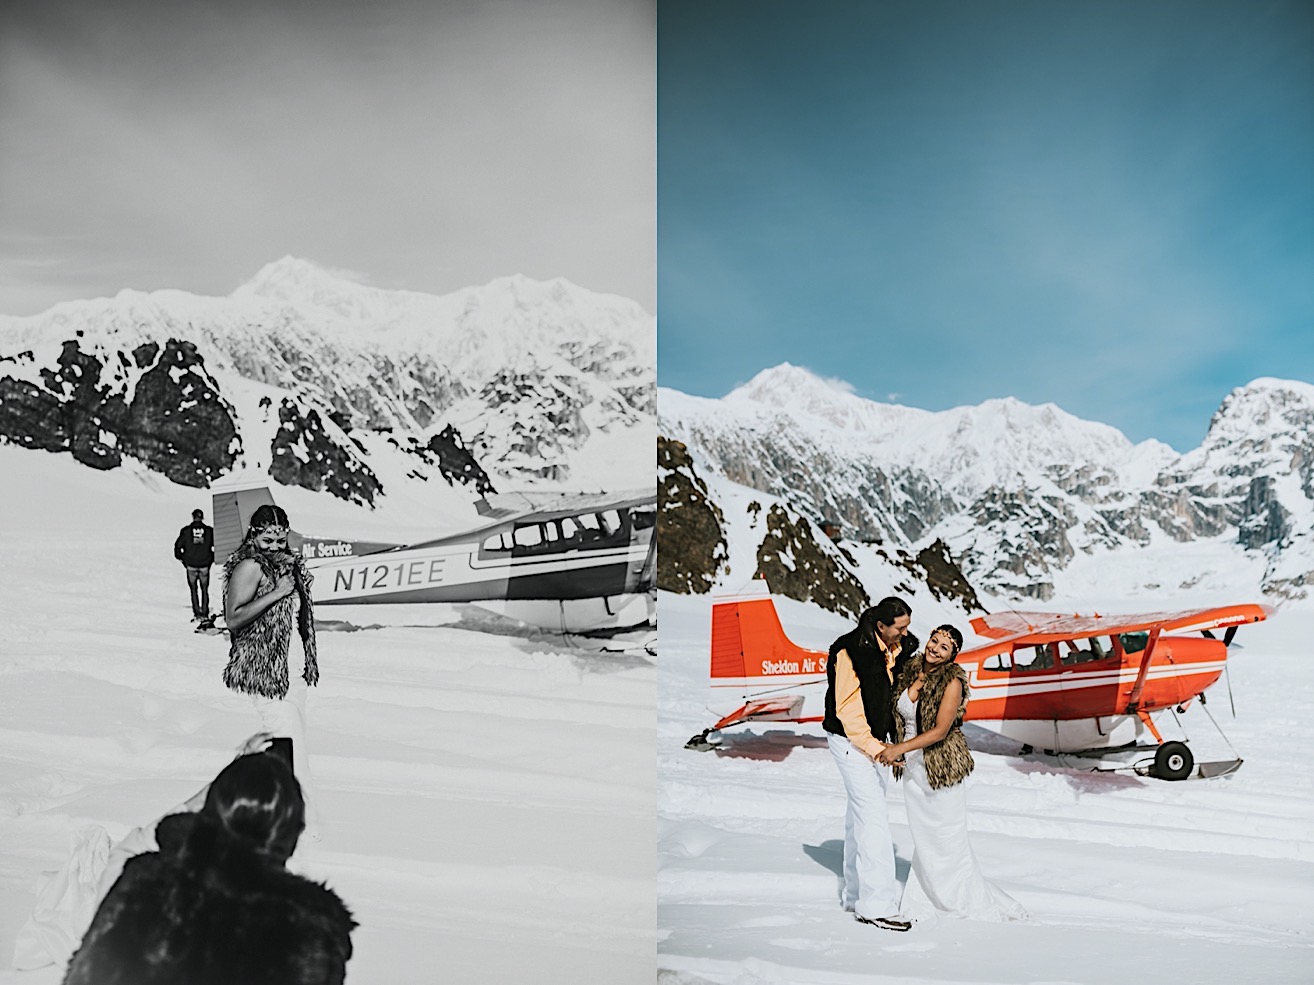 Side by side images of the groom photographing his bride after their glacier elopement and a photo of the bride and groom holding hands together in front of the plane